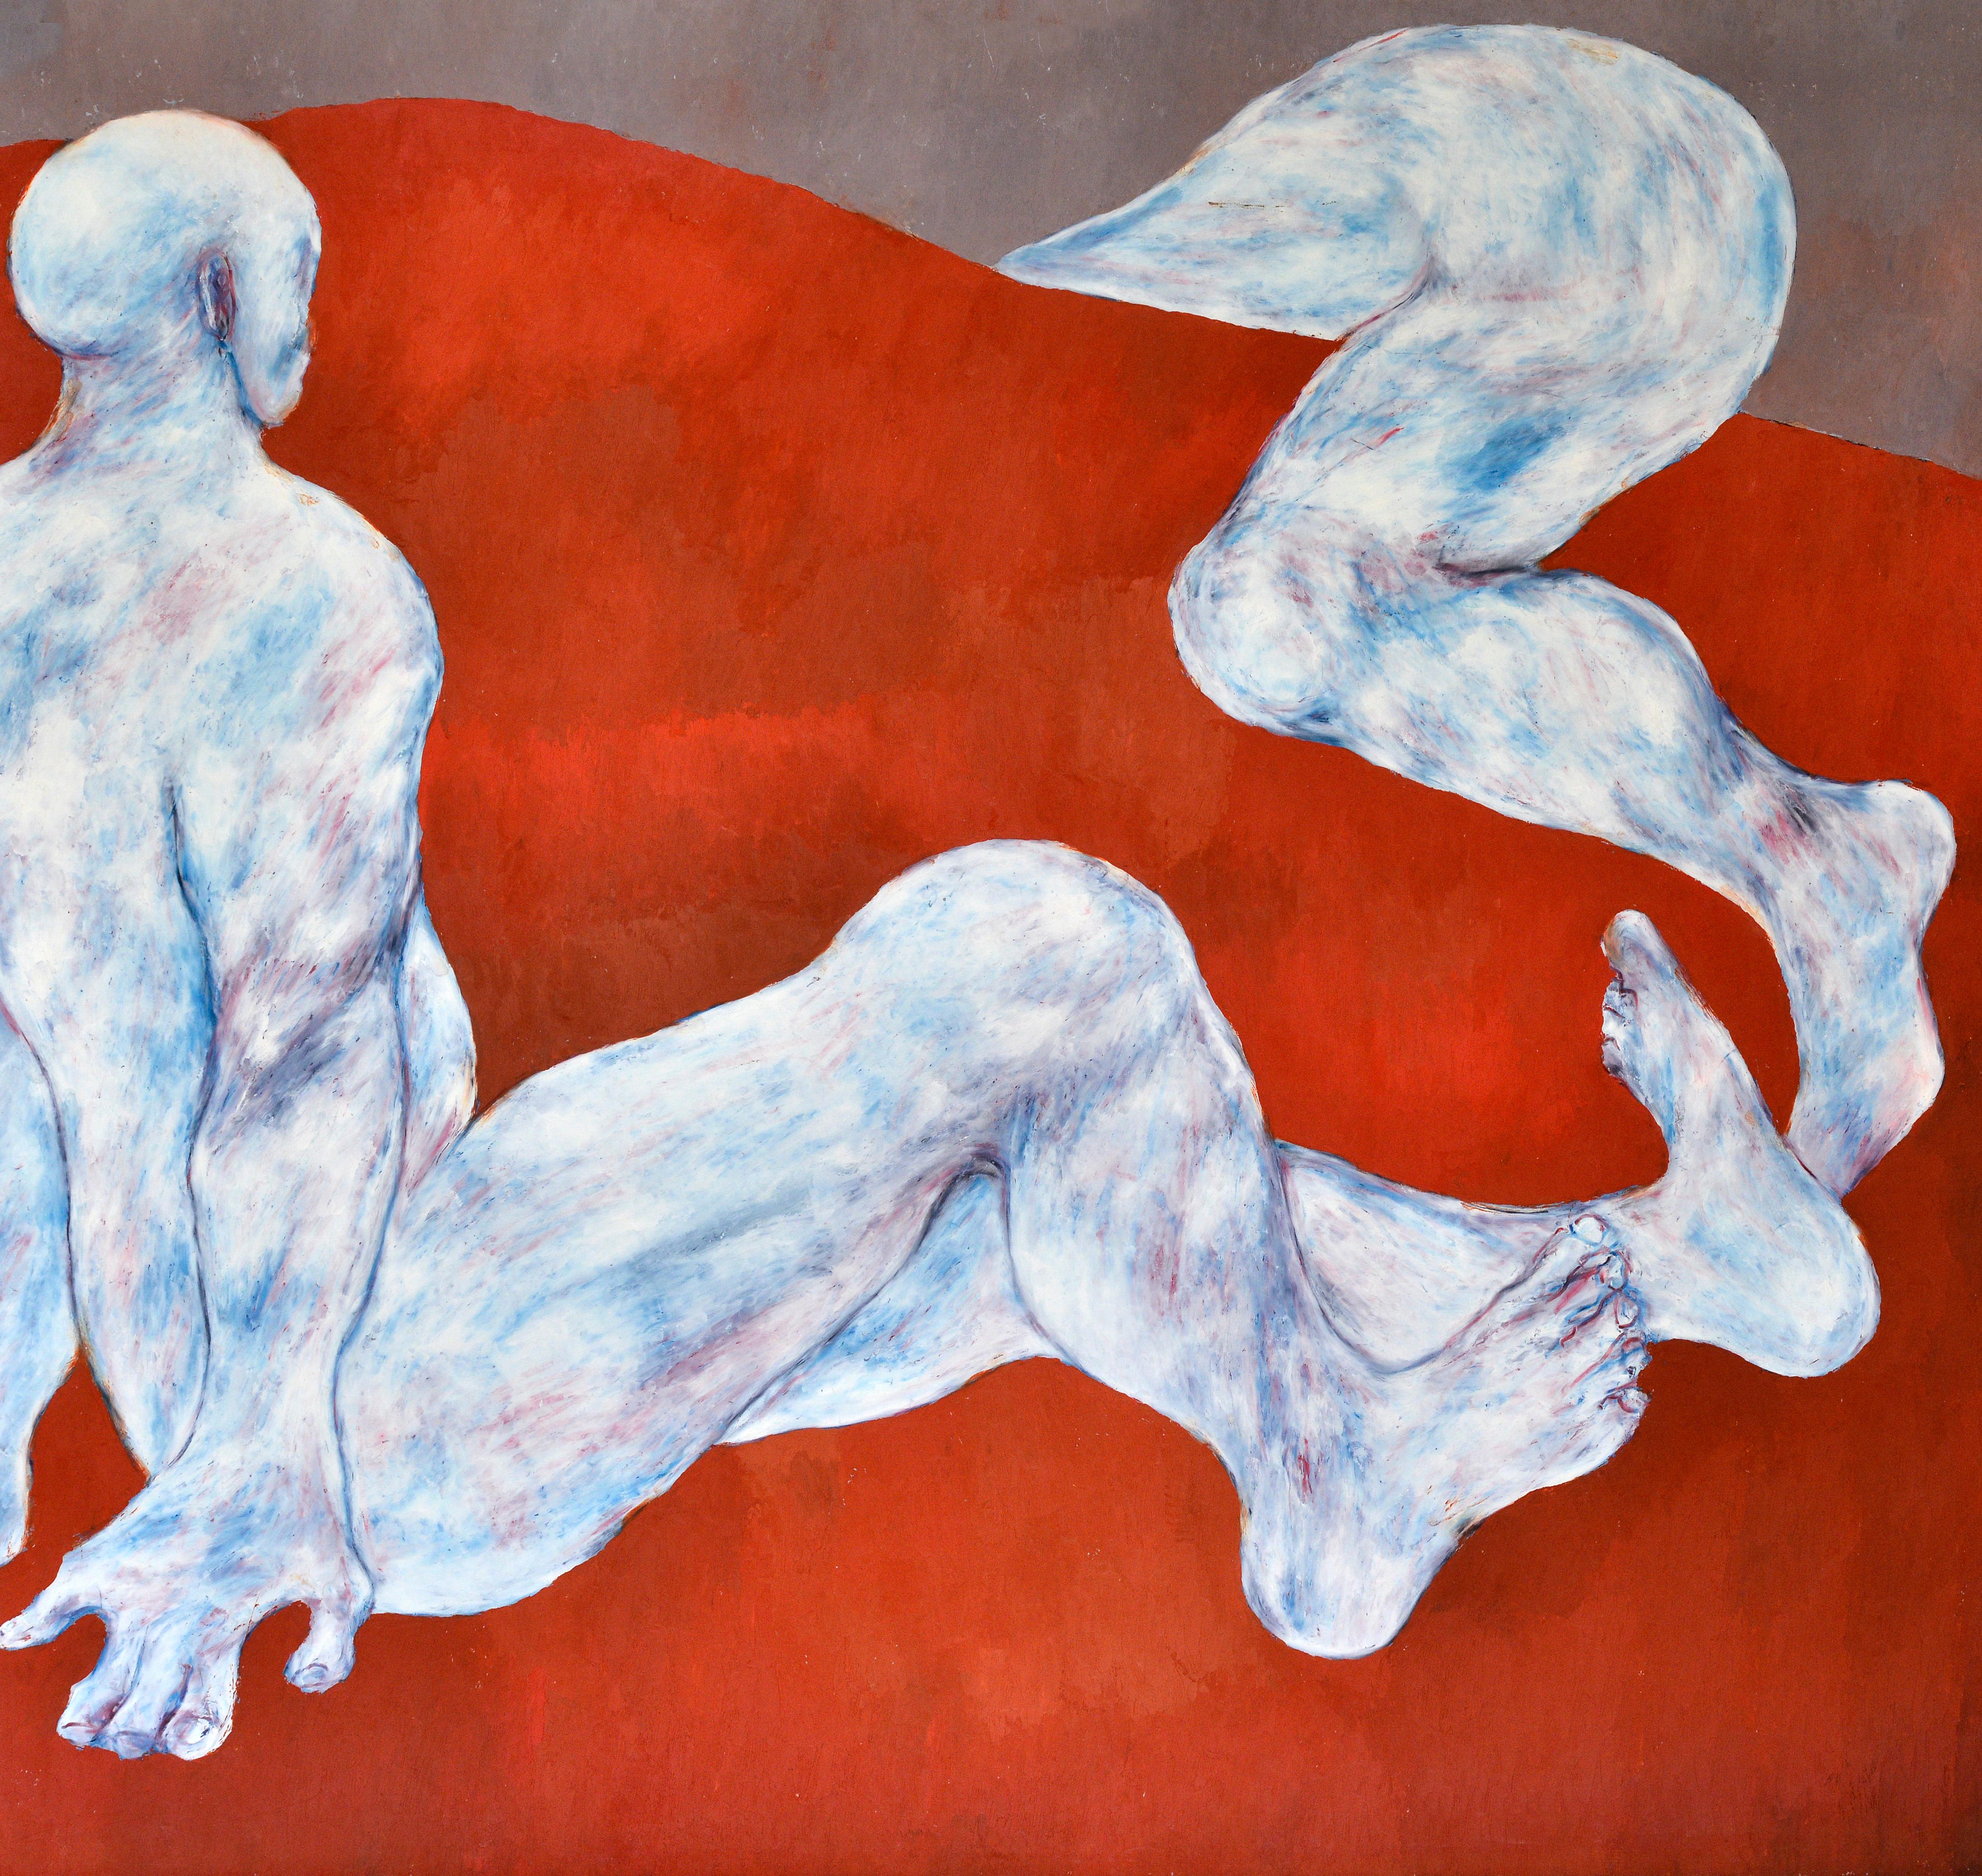 Nudes on a red sofa - Red Figurative Painting by Jean Sanglar